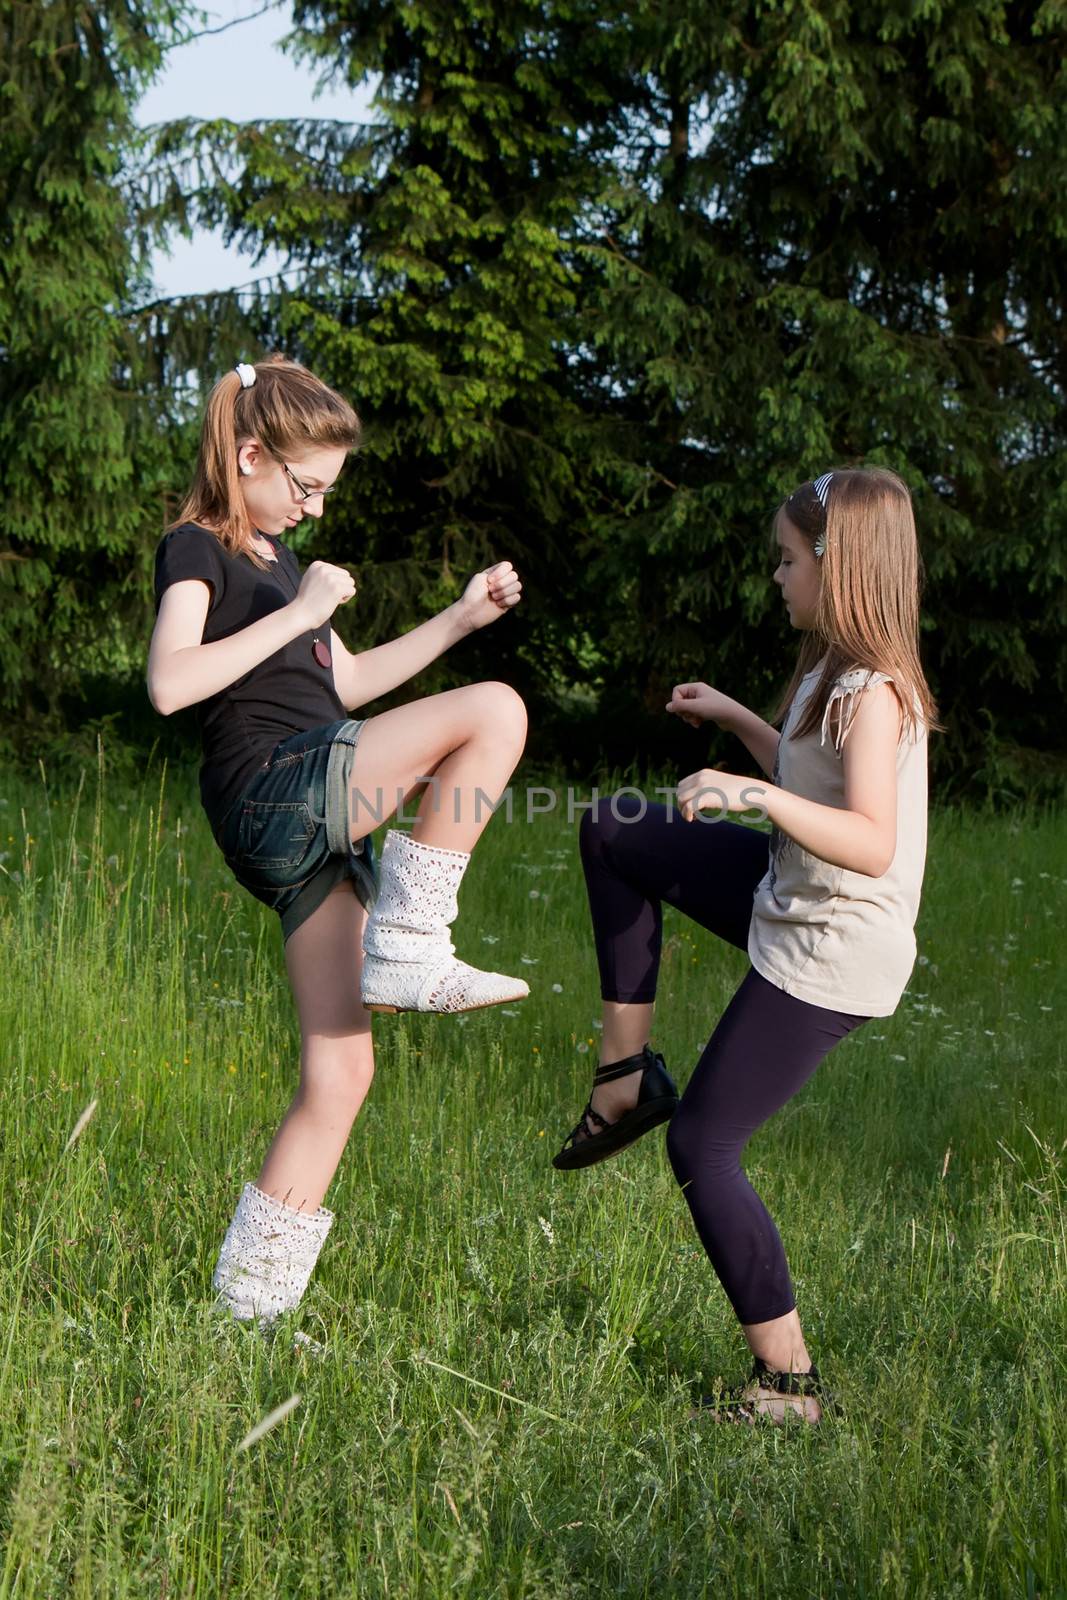 Two teens dancing girls in grass on a meadow